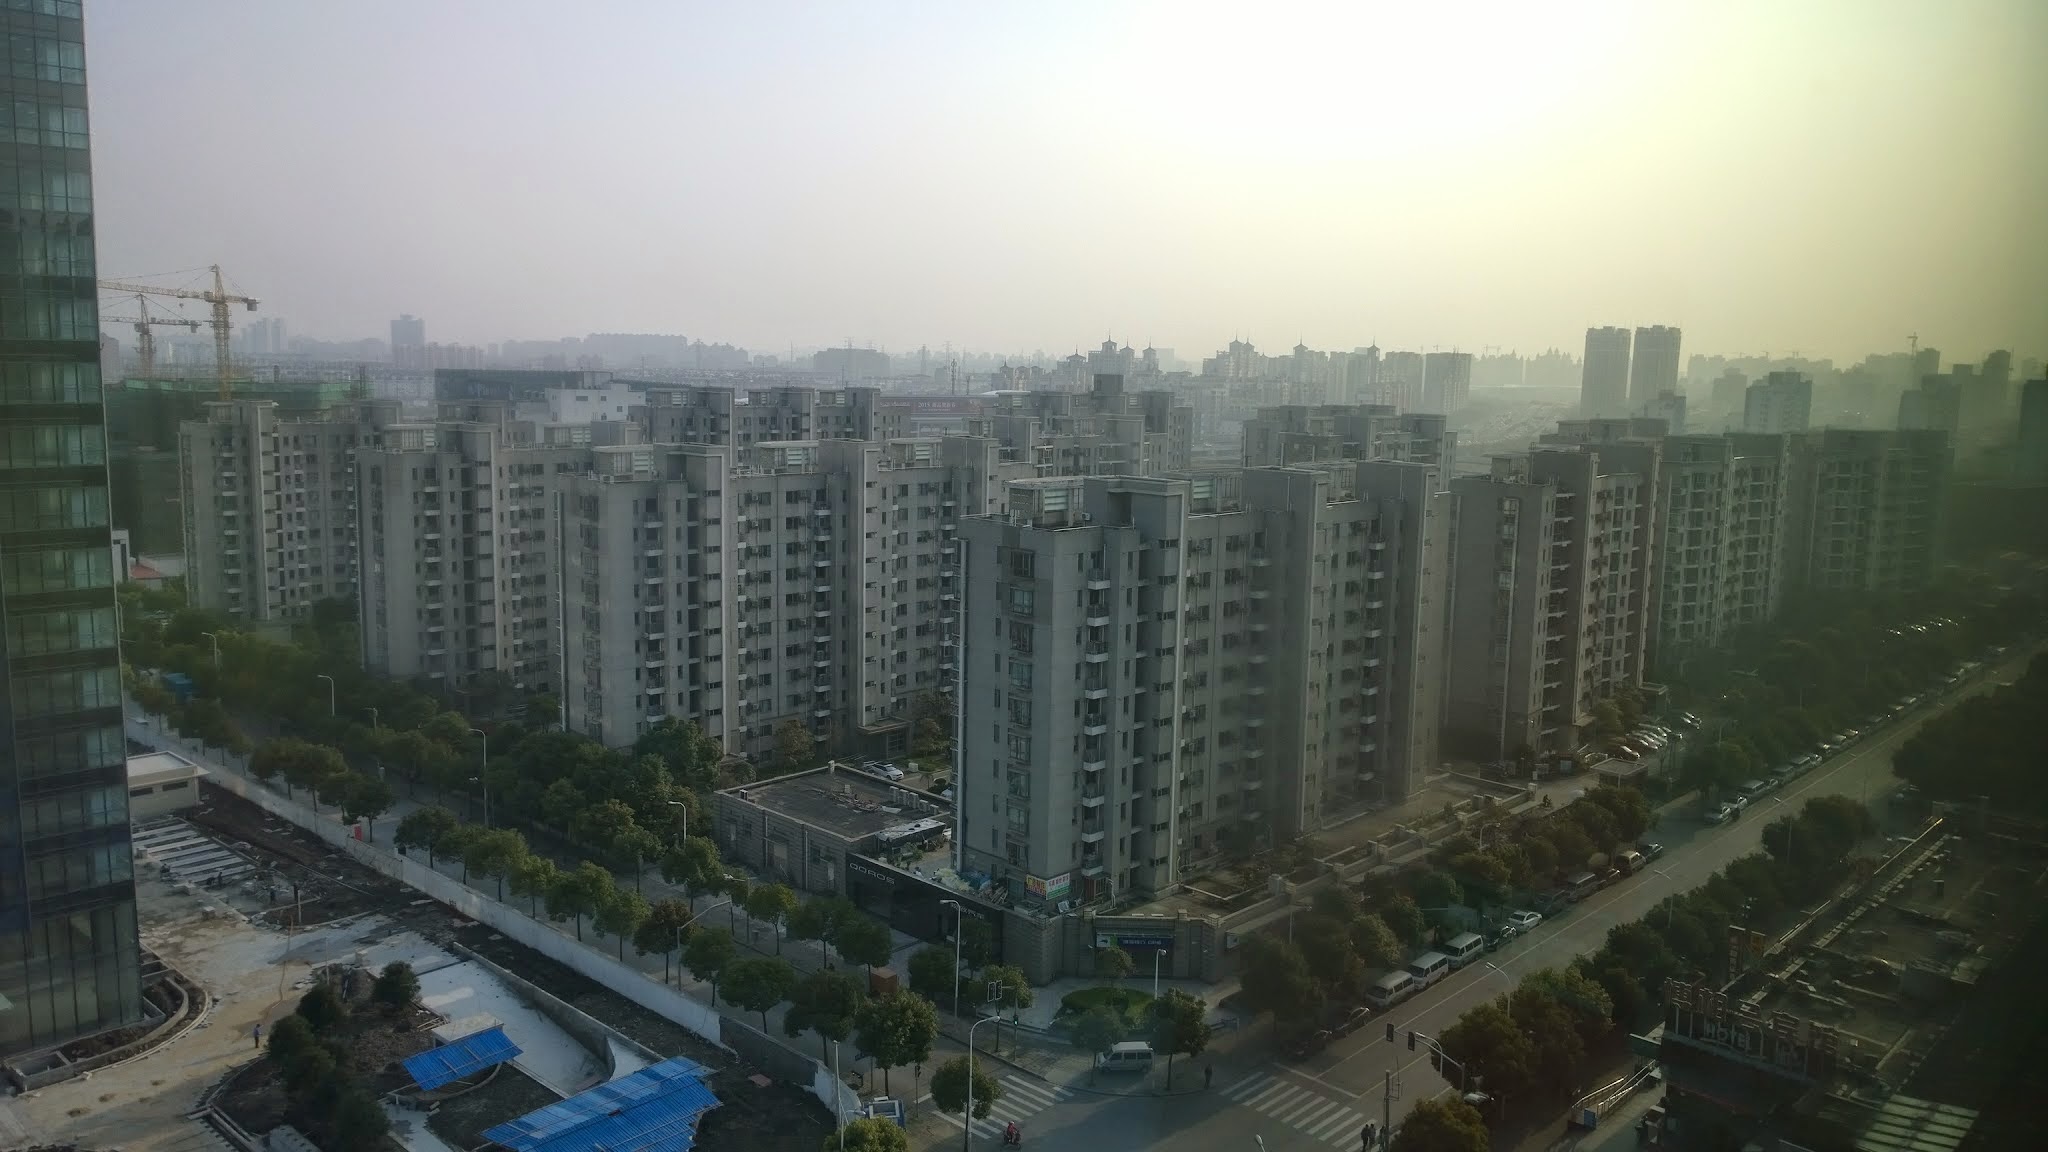 View of the apartment complex